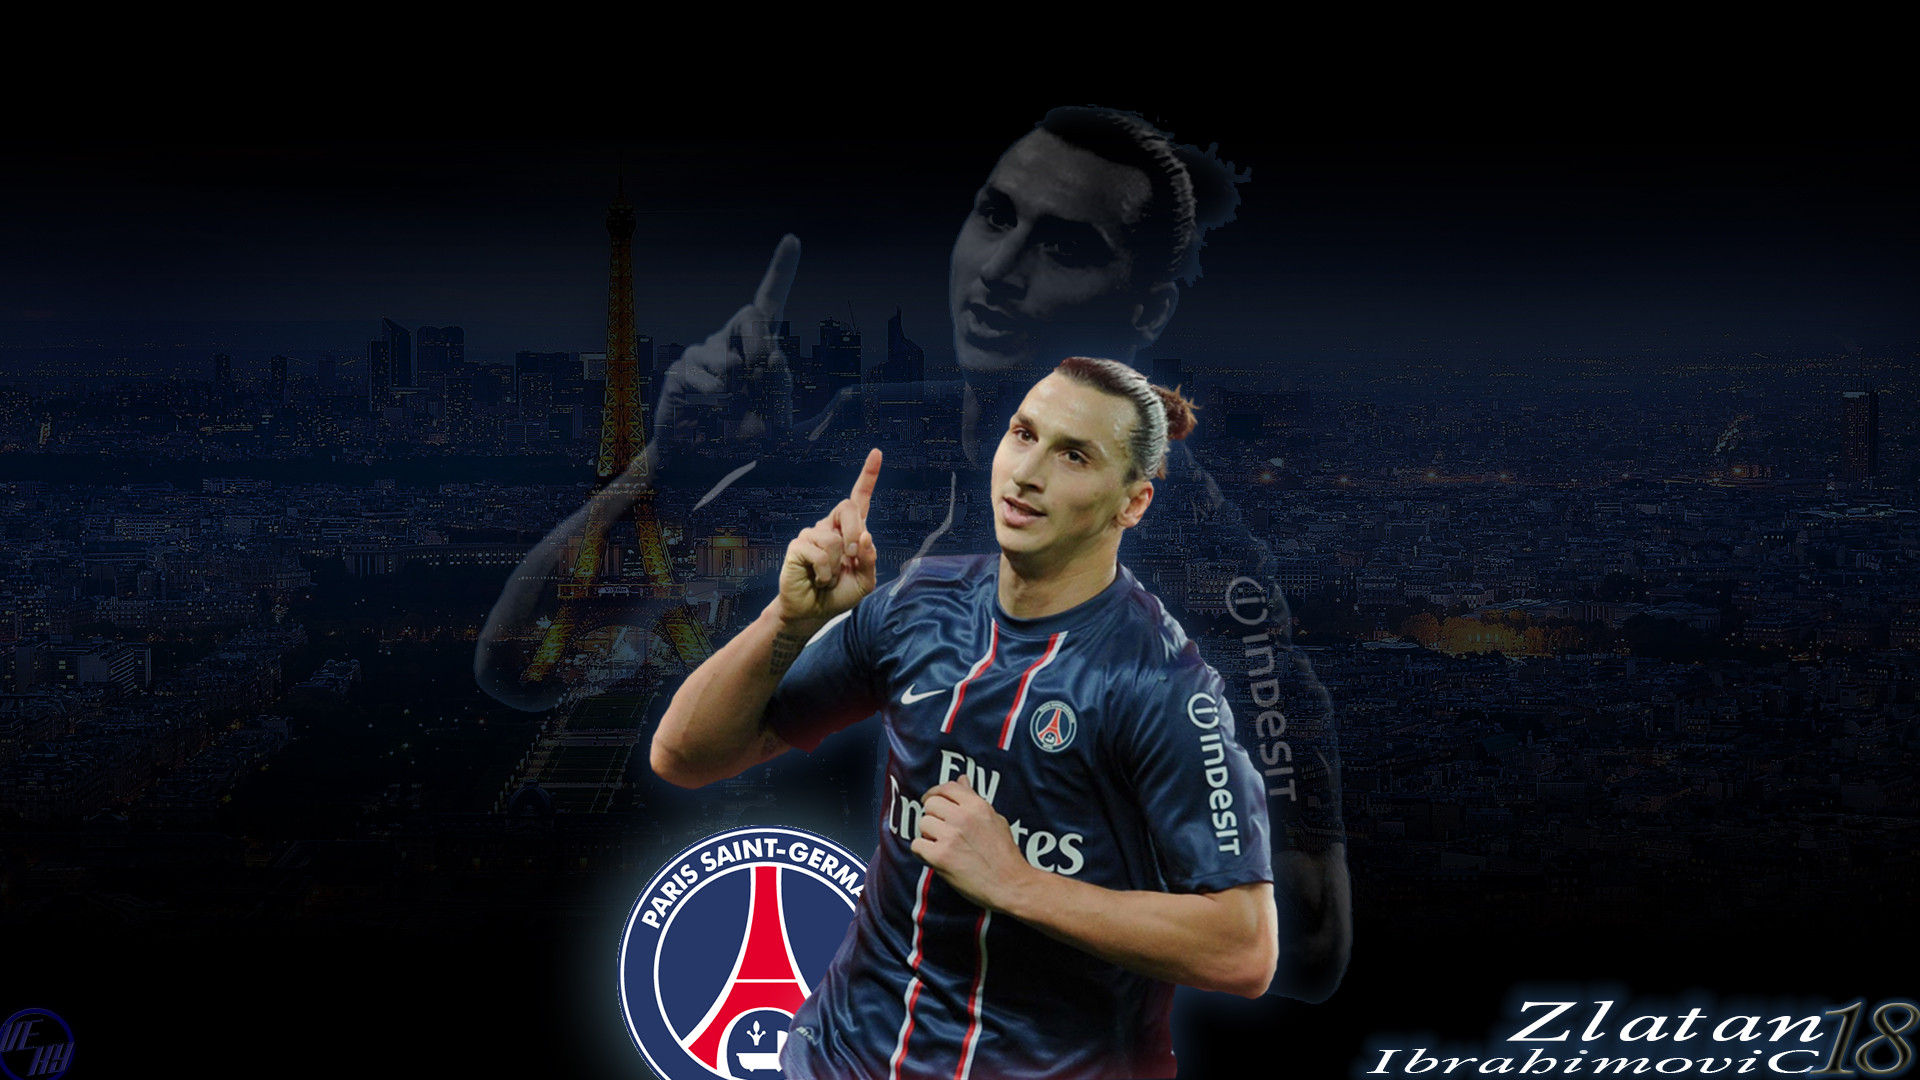 Free Download Zlatan Ibrahimovic Wallpapers Pictures Images 1920x1080 For Your Desktop Mobile Tablet Explore 51 Zlatan Wallpaper Zlatan Wallpaper Zlatan Ibrahimovic Wallpapers Zlatan Ibrahimovic Wallpaper